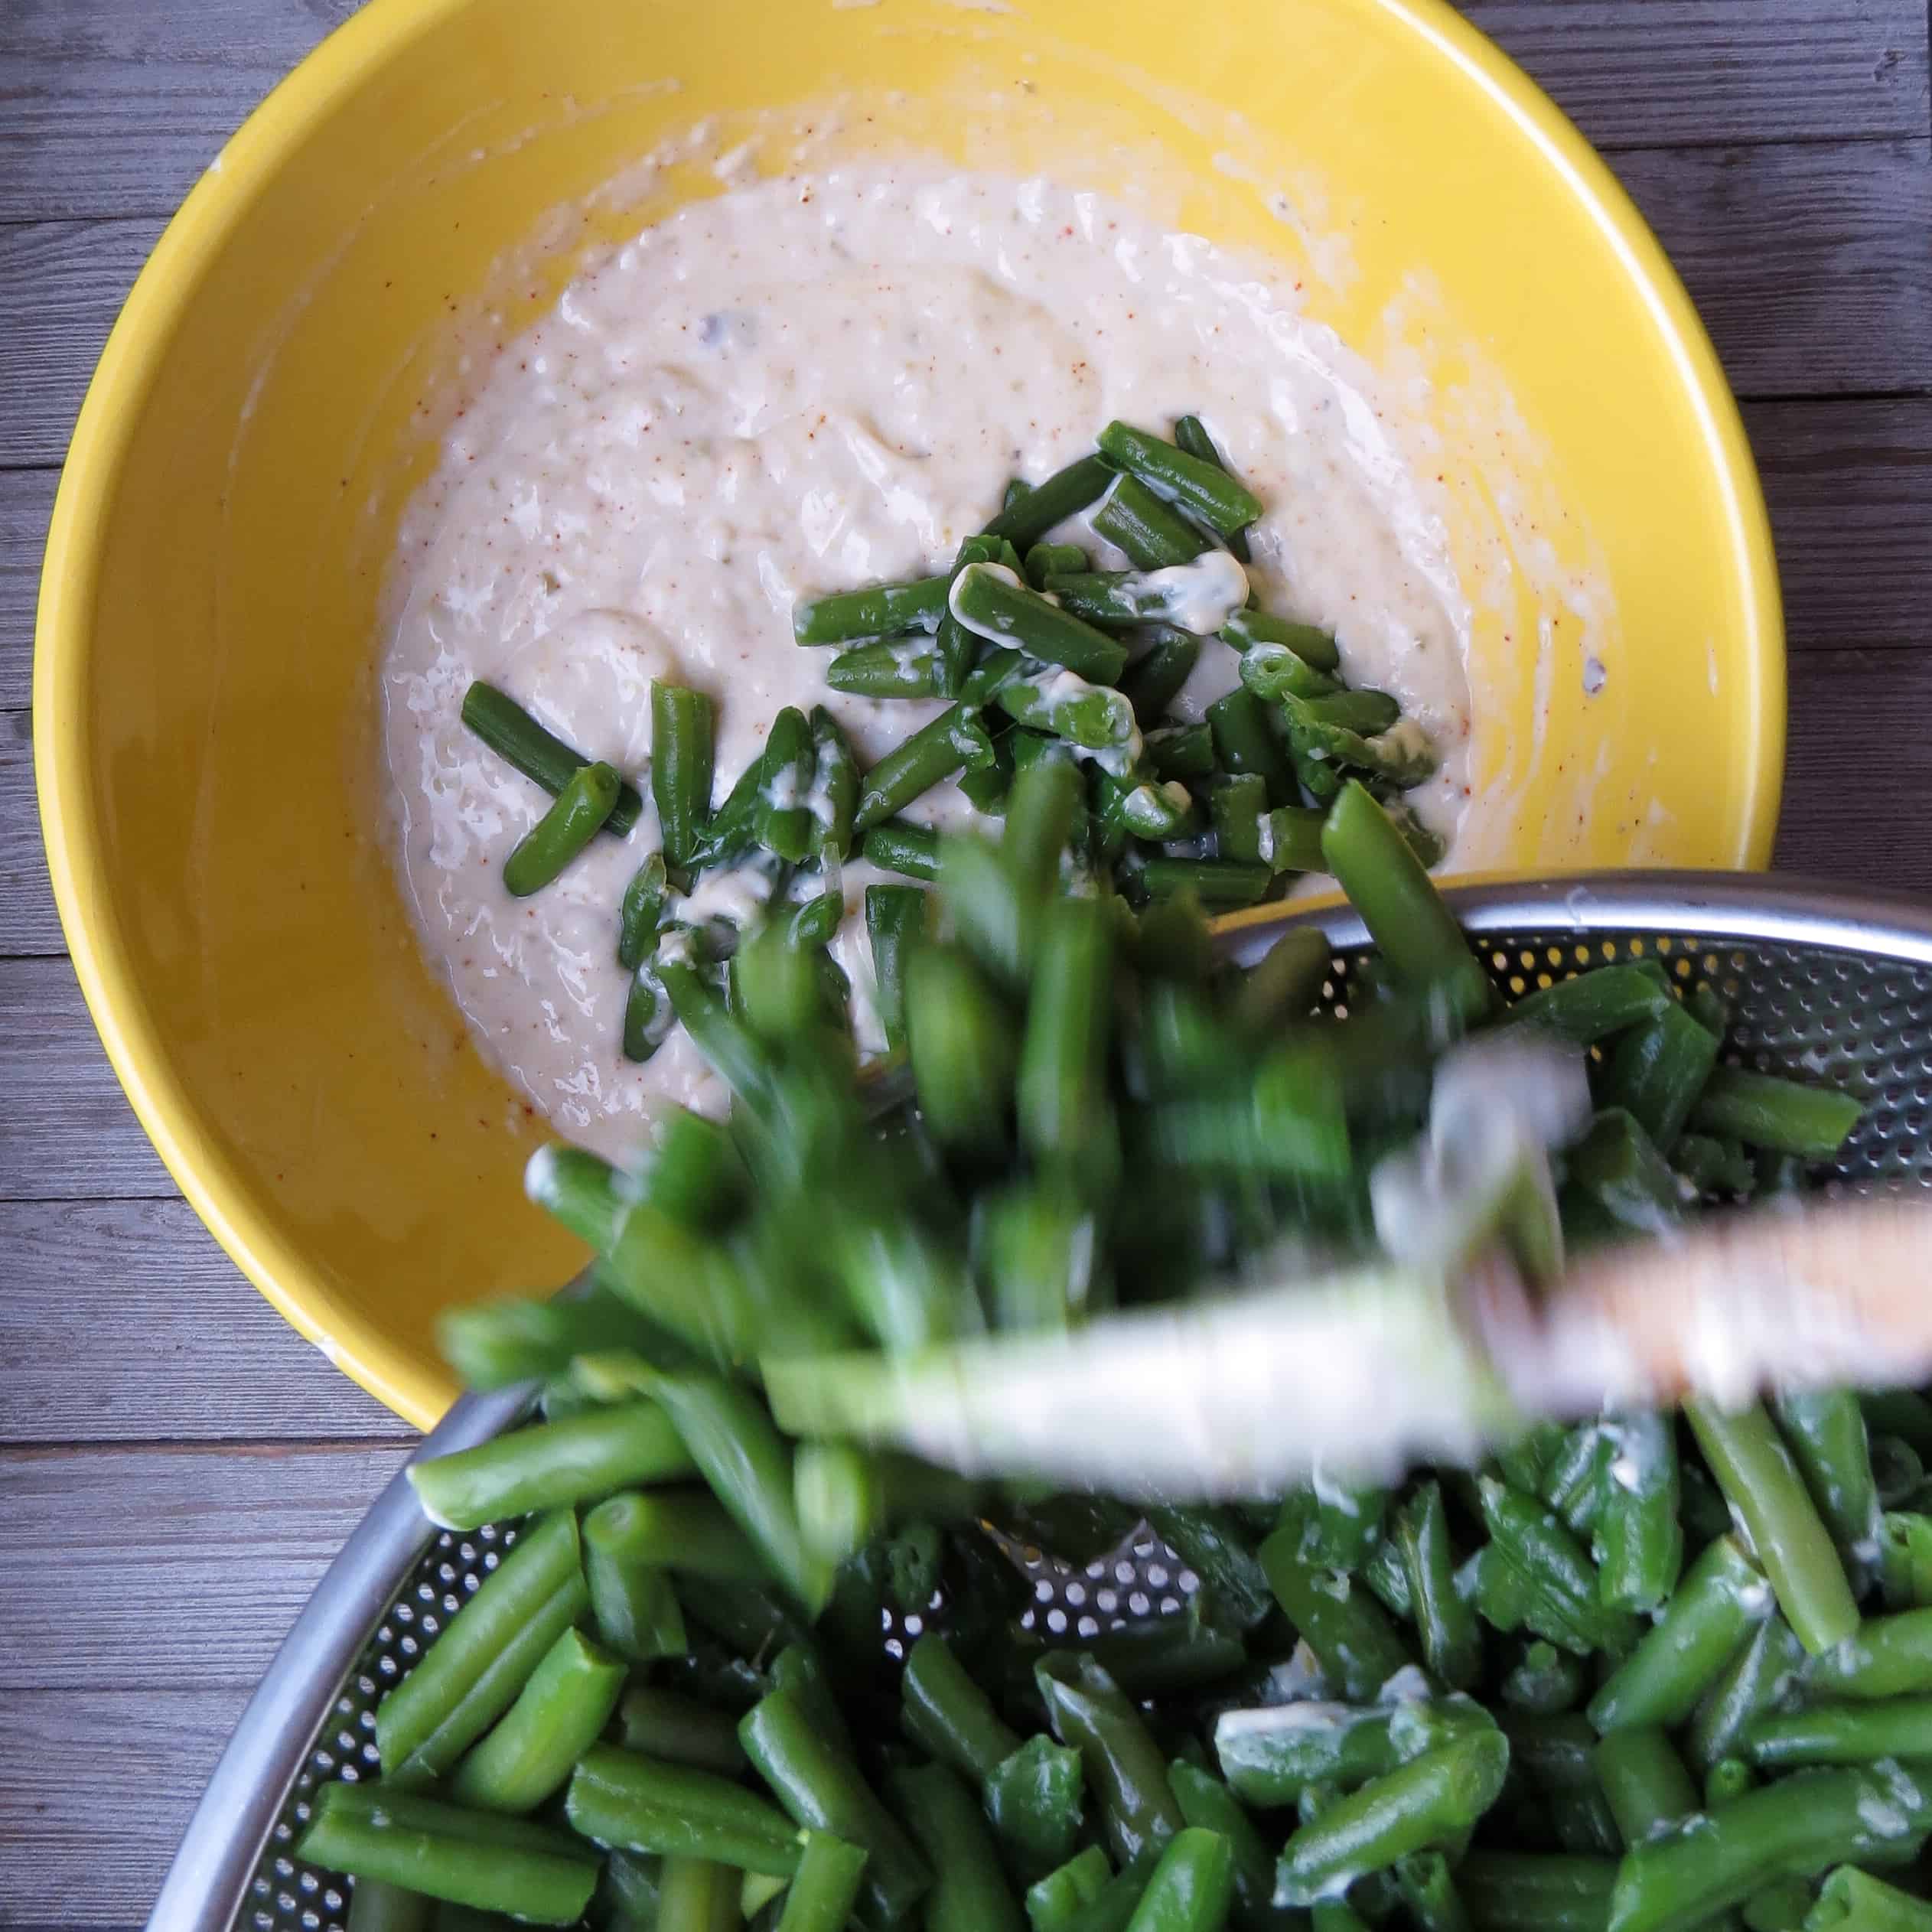 Green beans spooned into a bowl of creamed mixture.